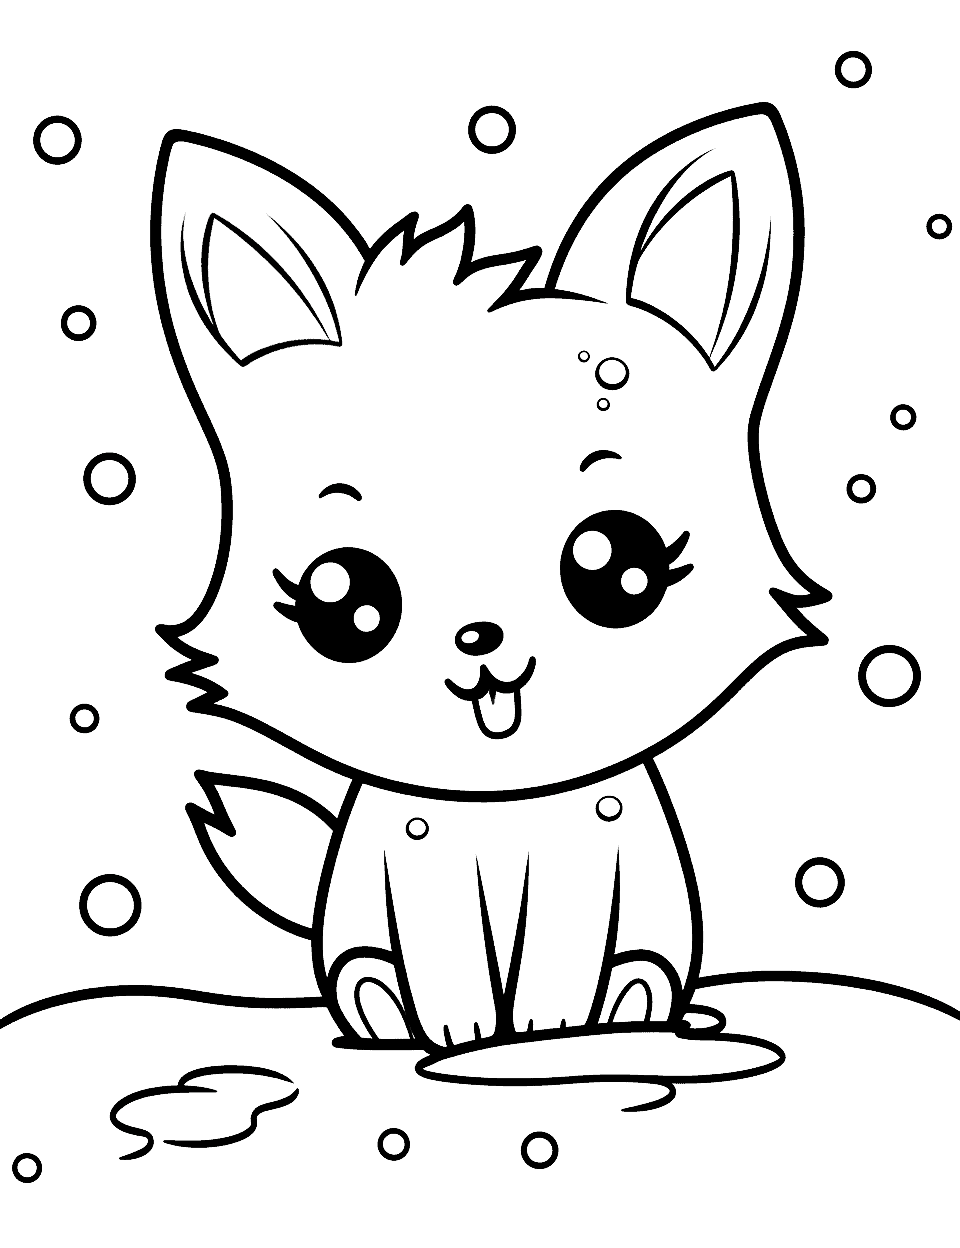 Chibi Wolf's Winter Wonderland Kawaii Coloring Page - A cute Chibi wolf playing in a snowy landscape, with snowflakes gently falling around.